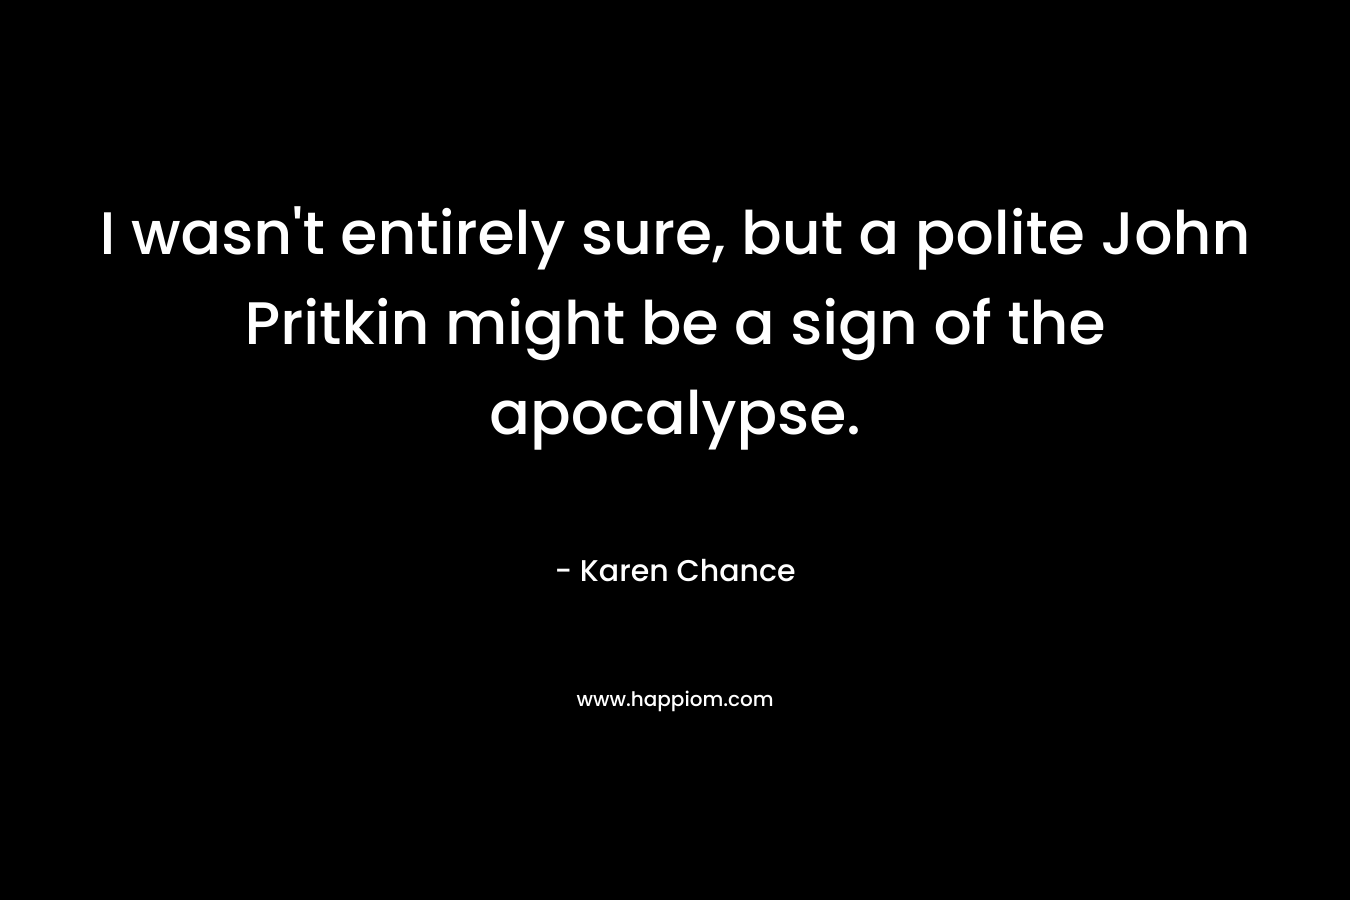 I wasn’t entirely sure, but a polite John Pritkin might be a sign of the apocalypse. – Karen Chance